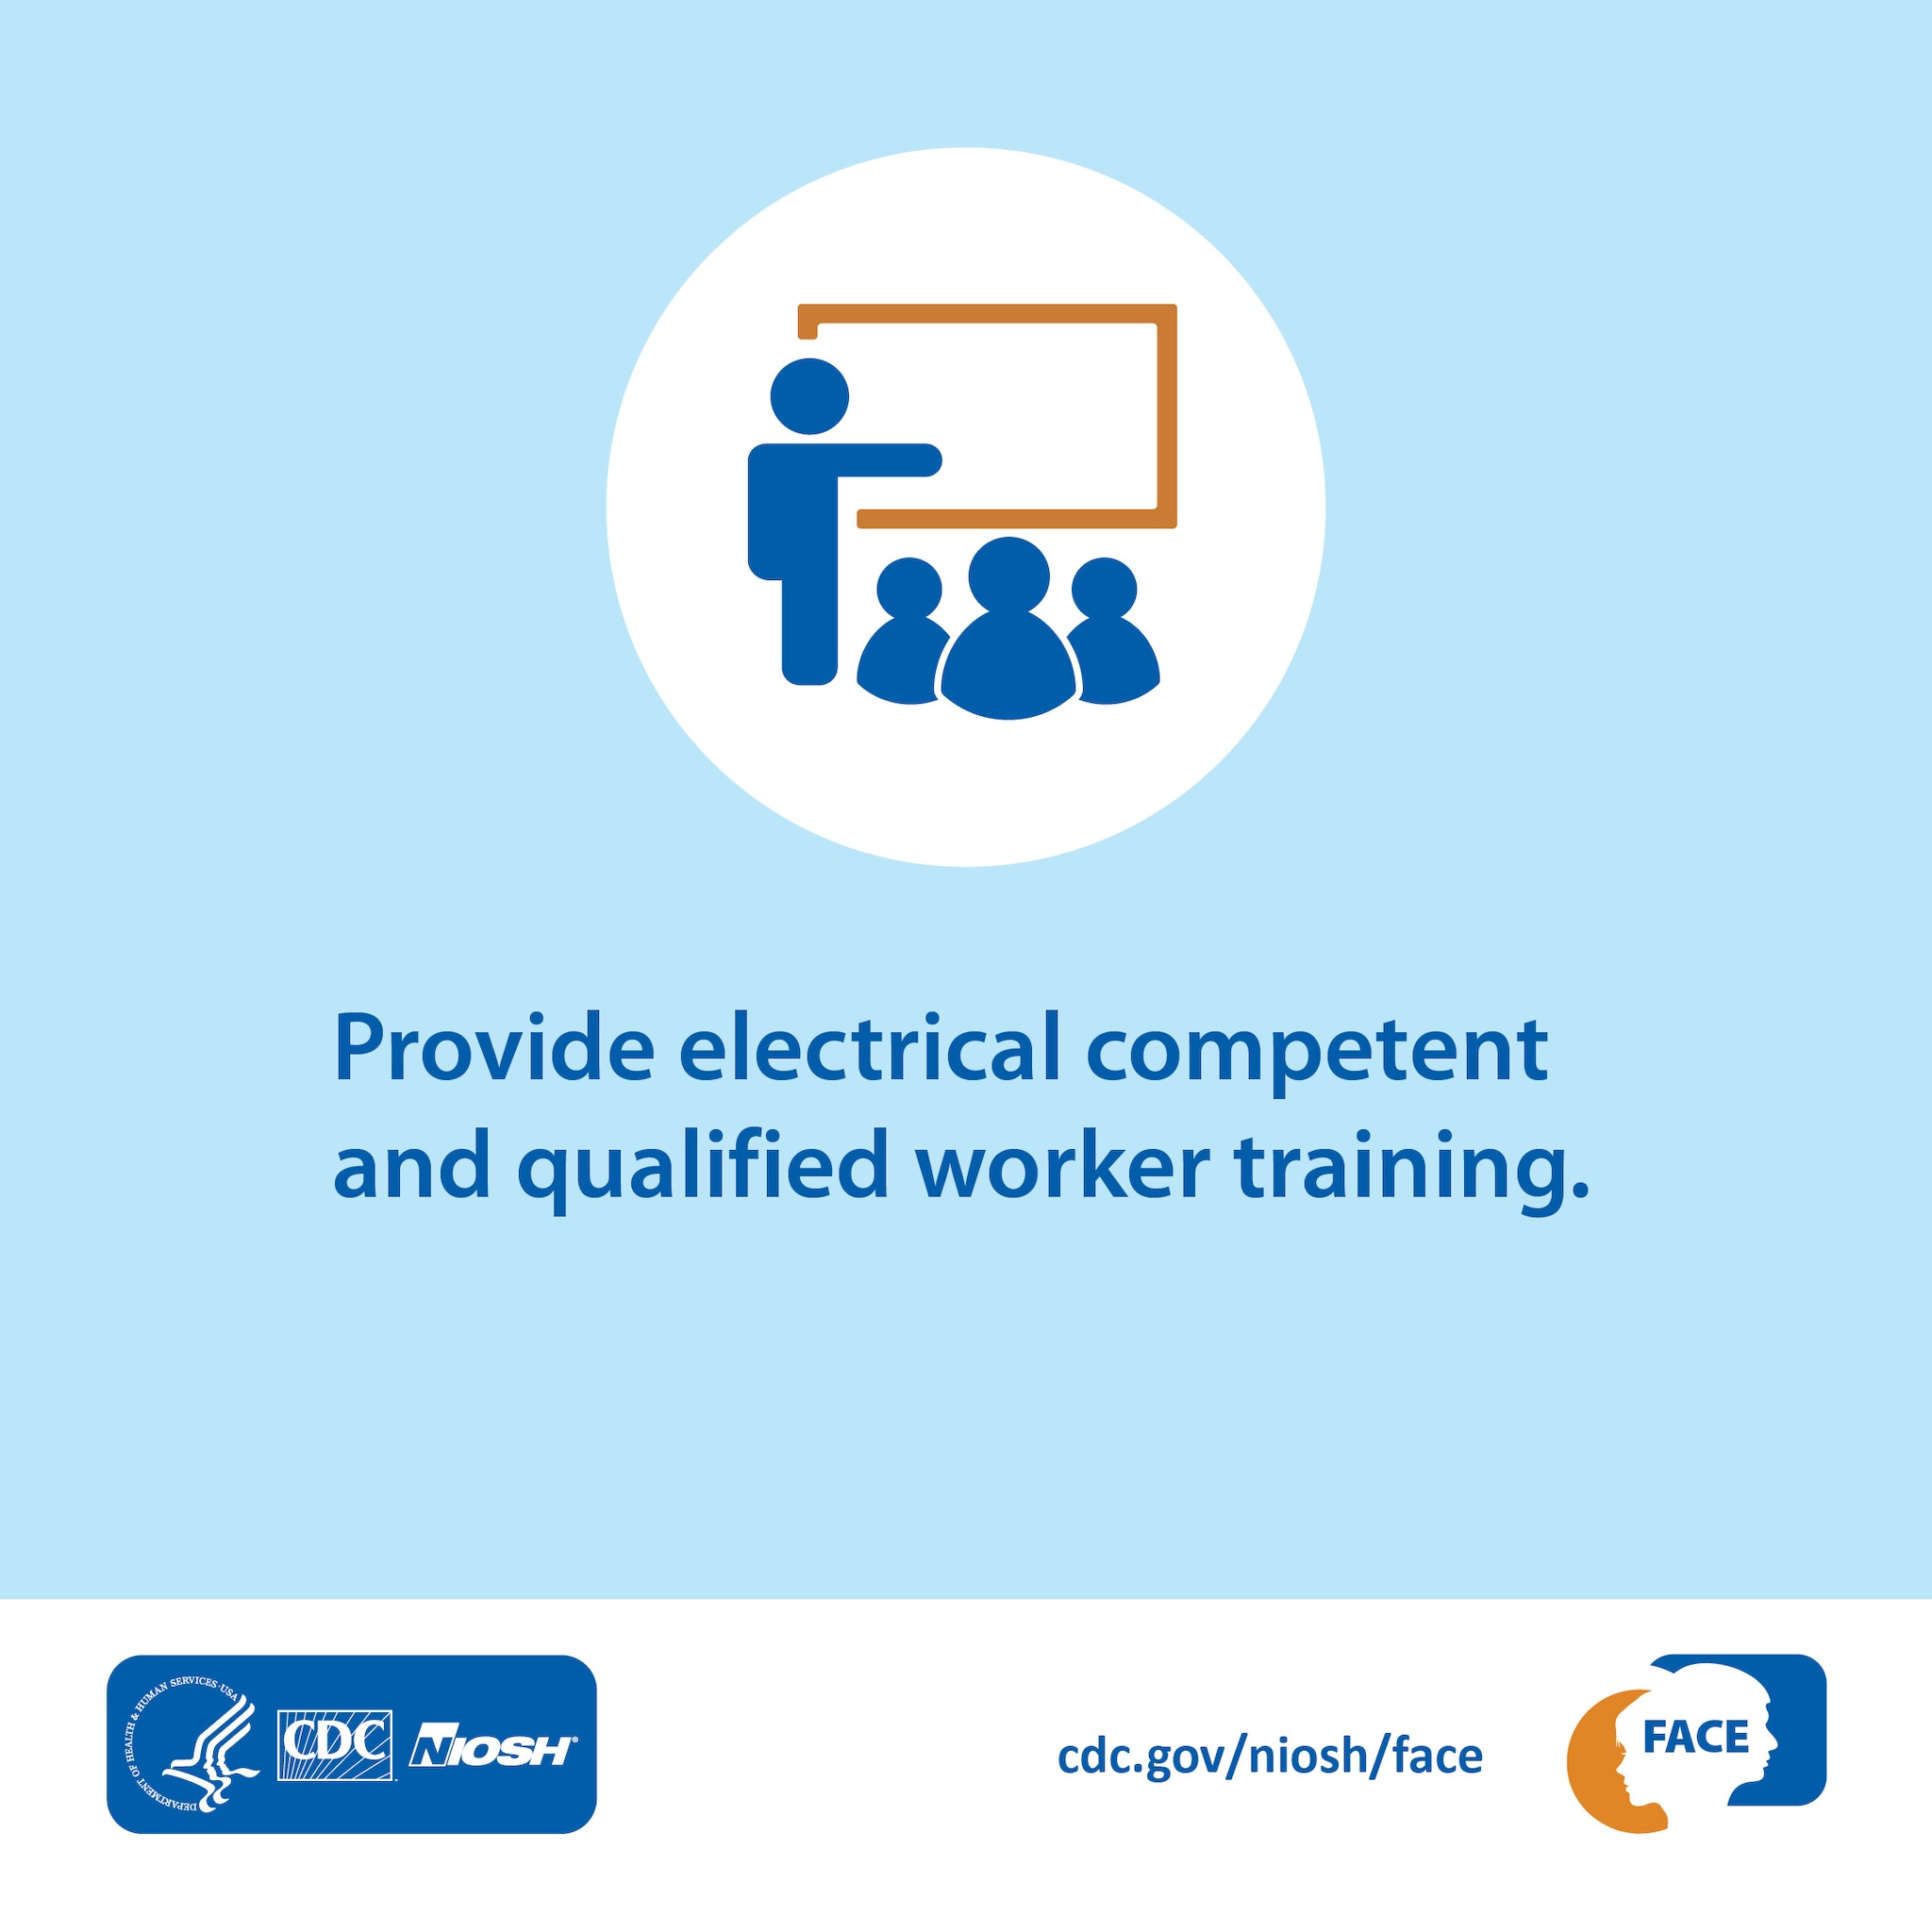 Provide electrical competent and qualified worker training.